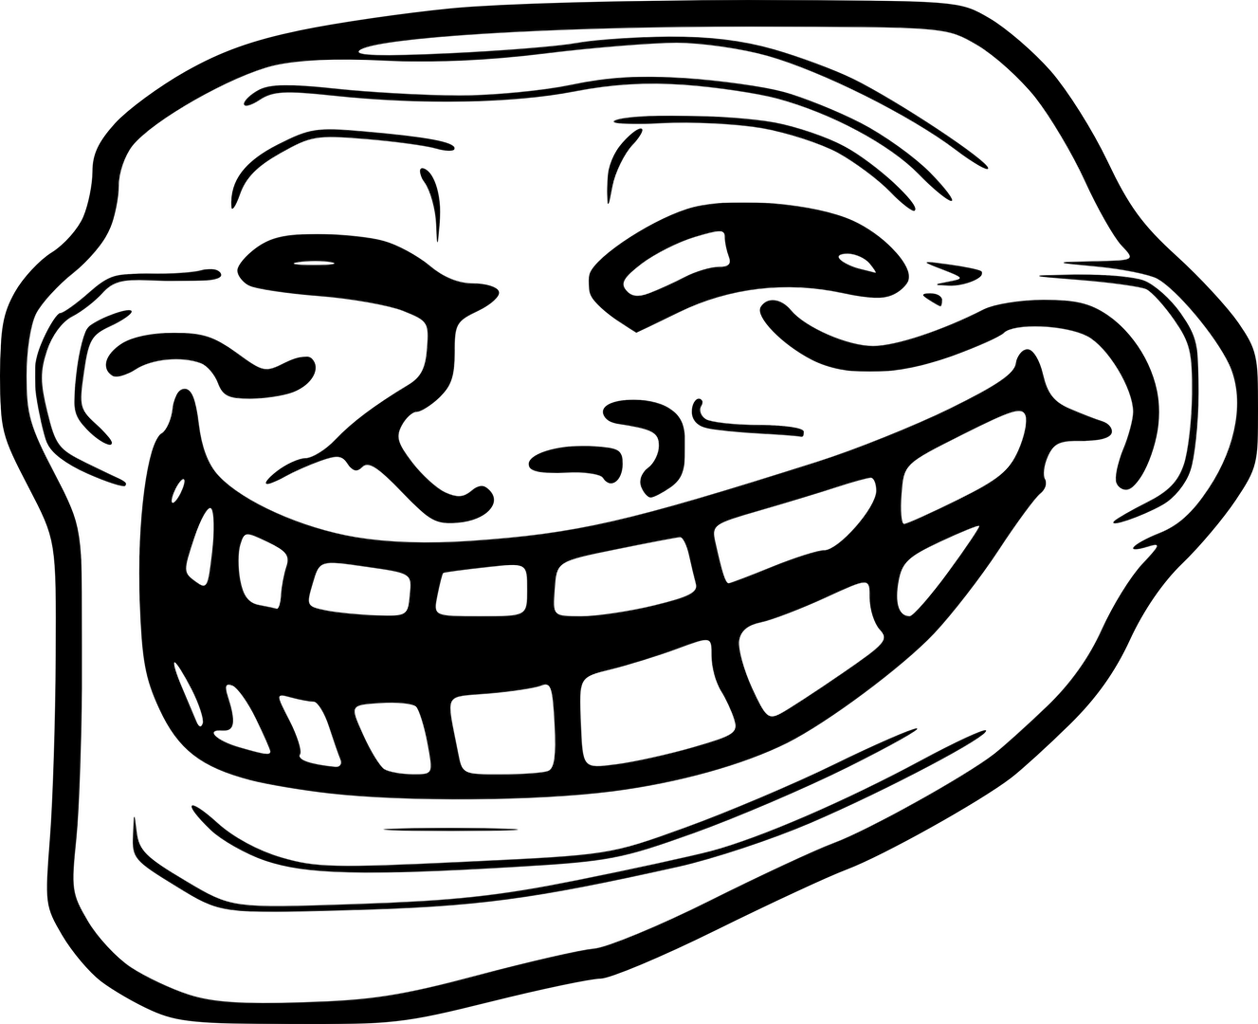 http://images2.wikia.nocookie.net/__cb20110819140755/fusionfall/images/thumb/d/dc/Troll_face.png/1258px-Troll_face.png